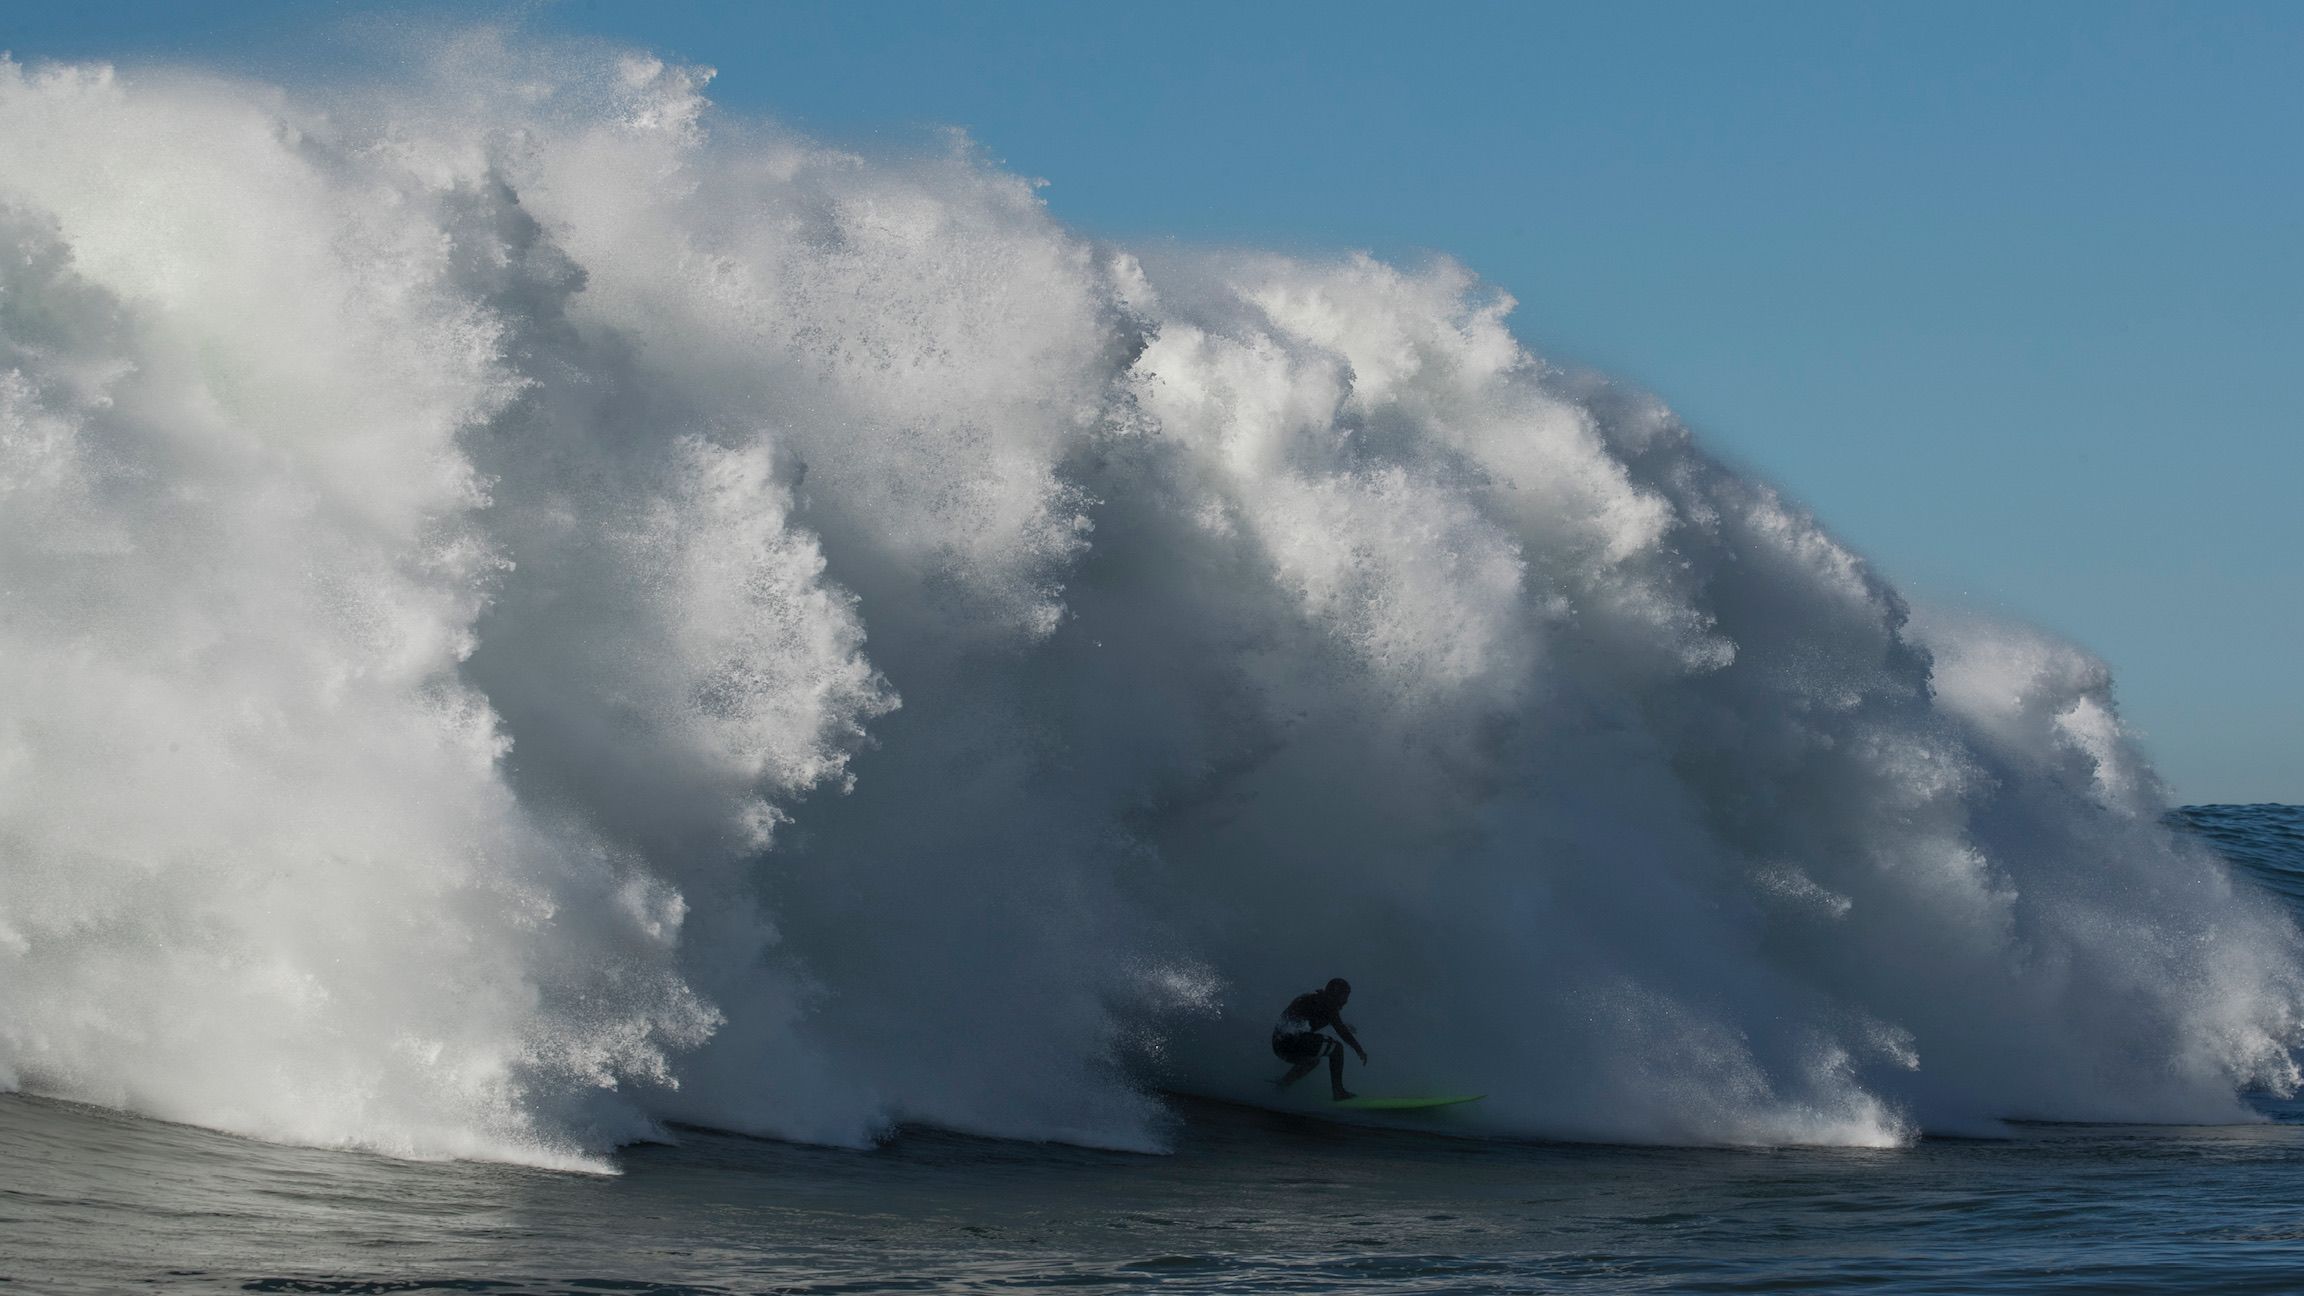 Nic von Rupp races ahead of a big wave in Portugal.